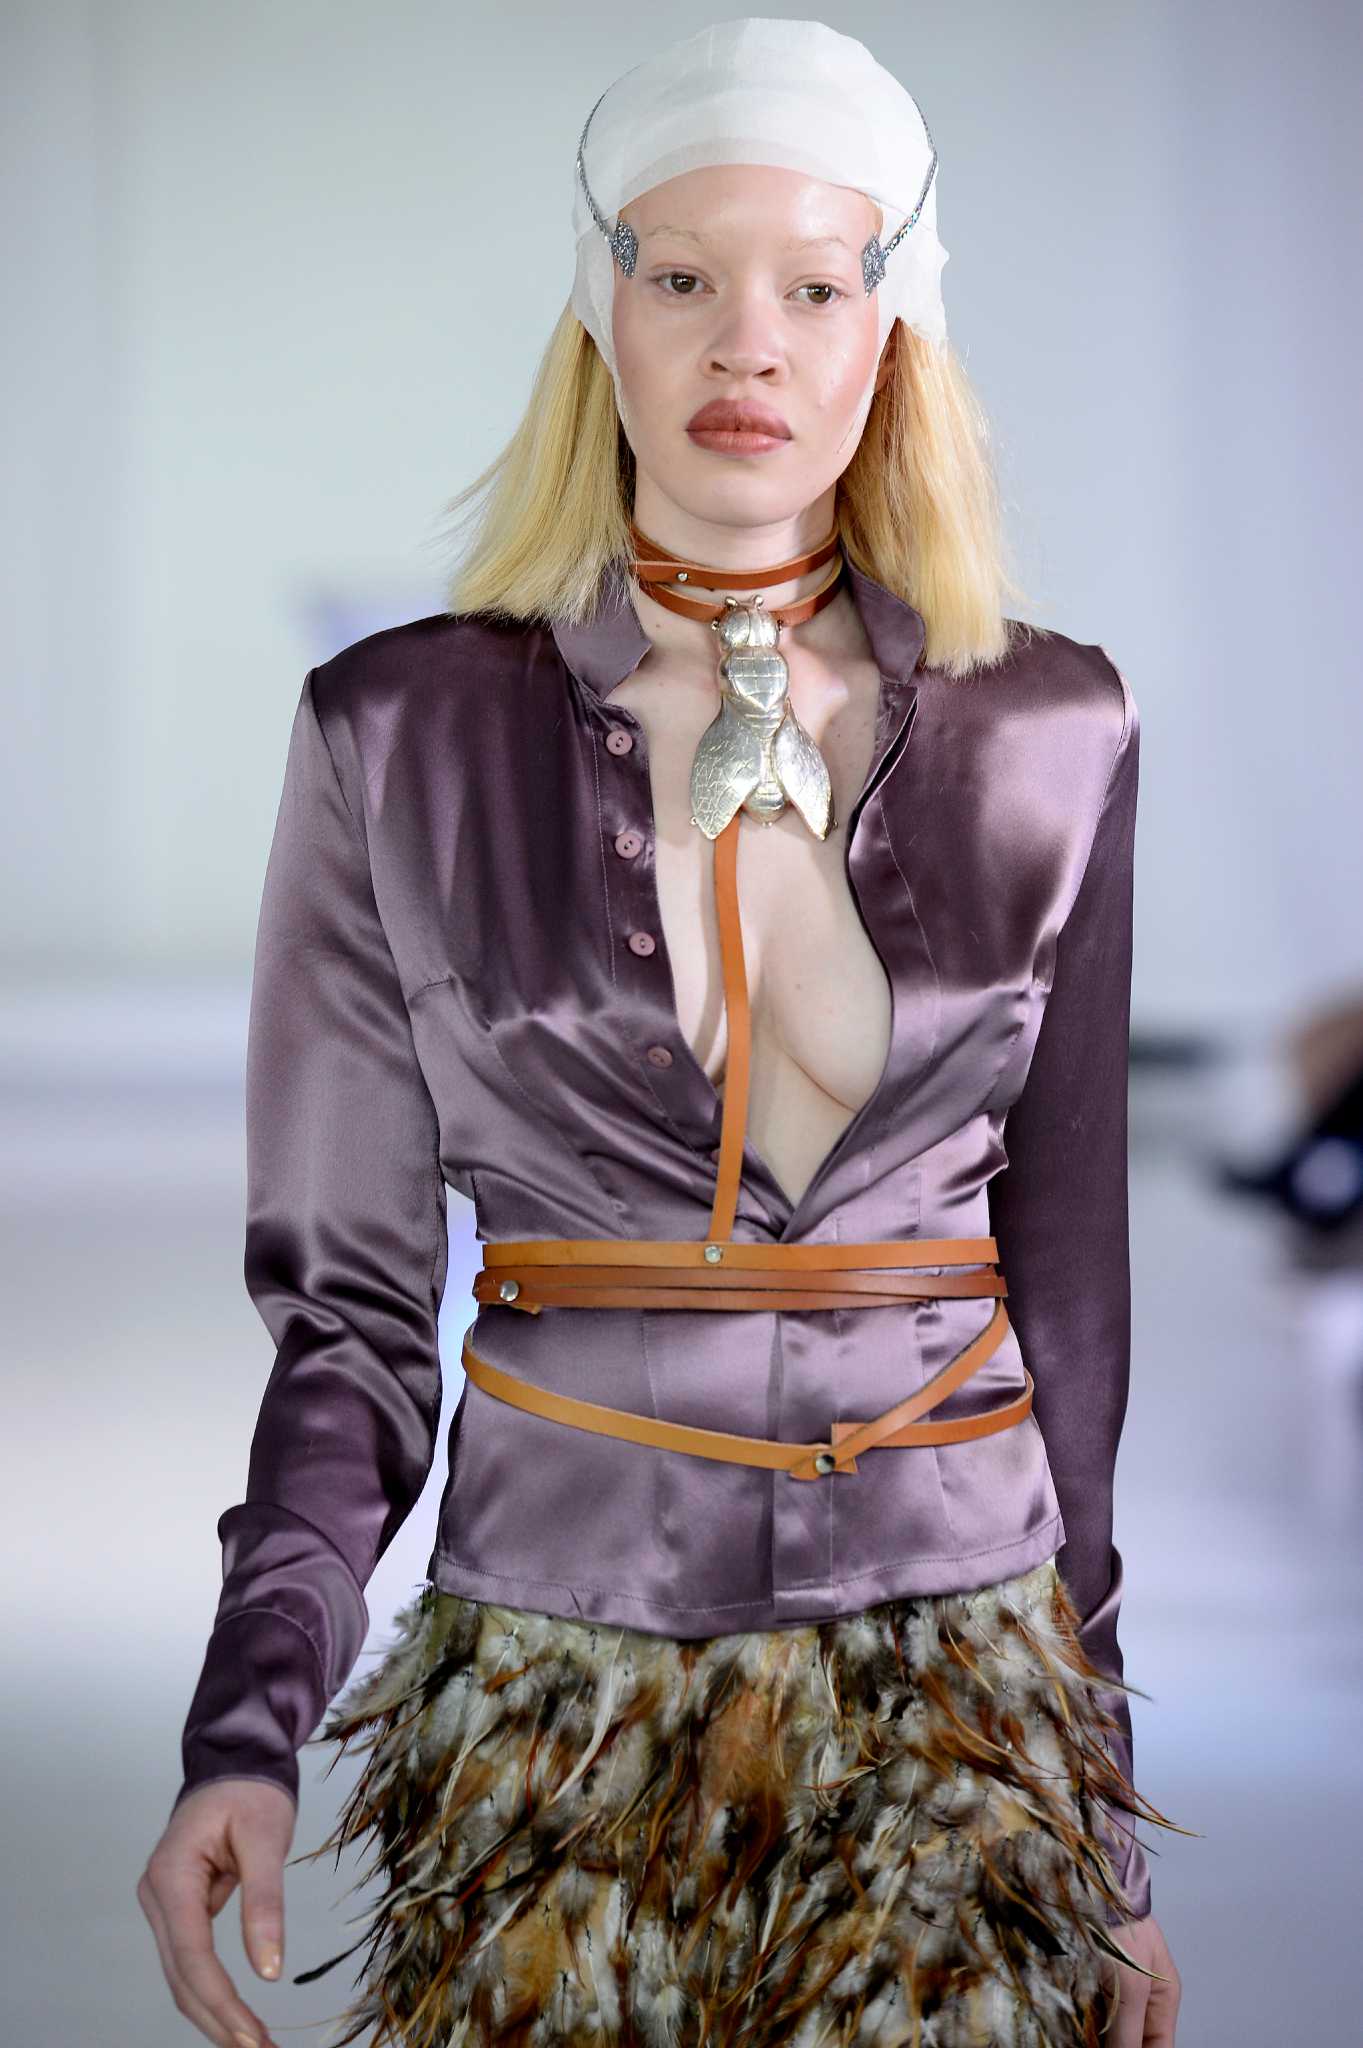 Model With 24-inch Waist Allegedly 'Too Big' for Louis Vuitton